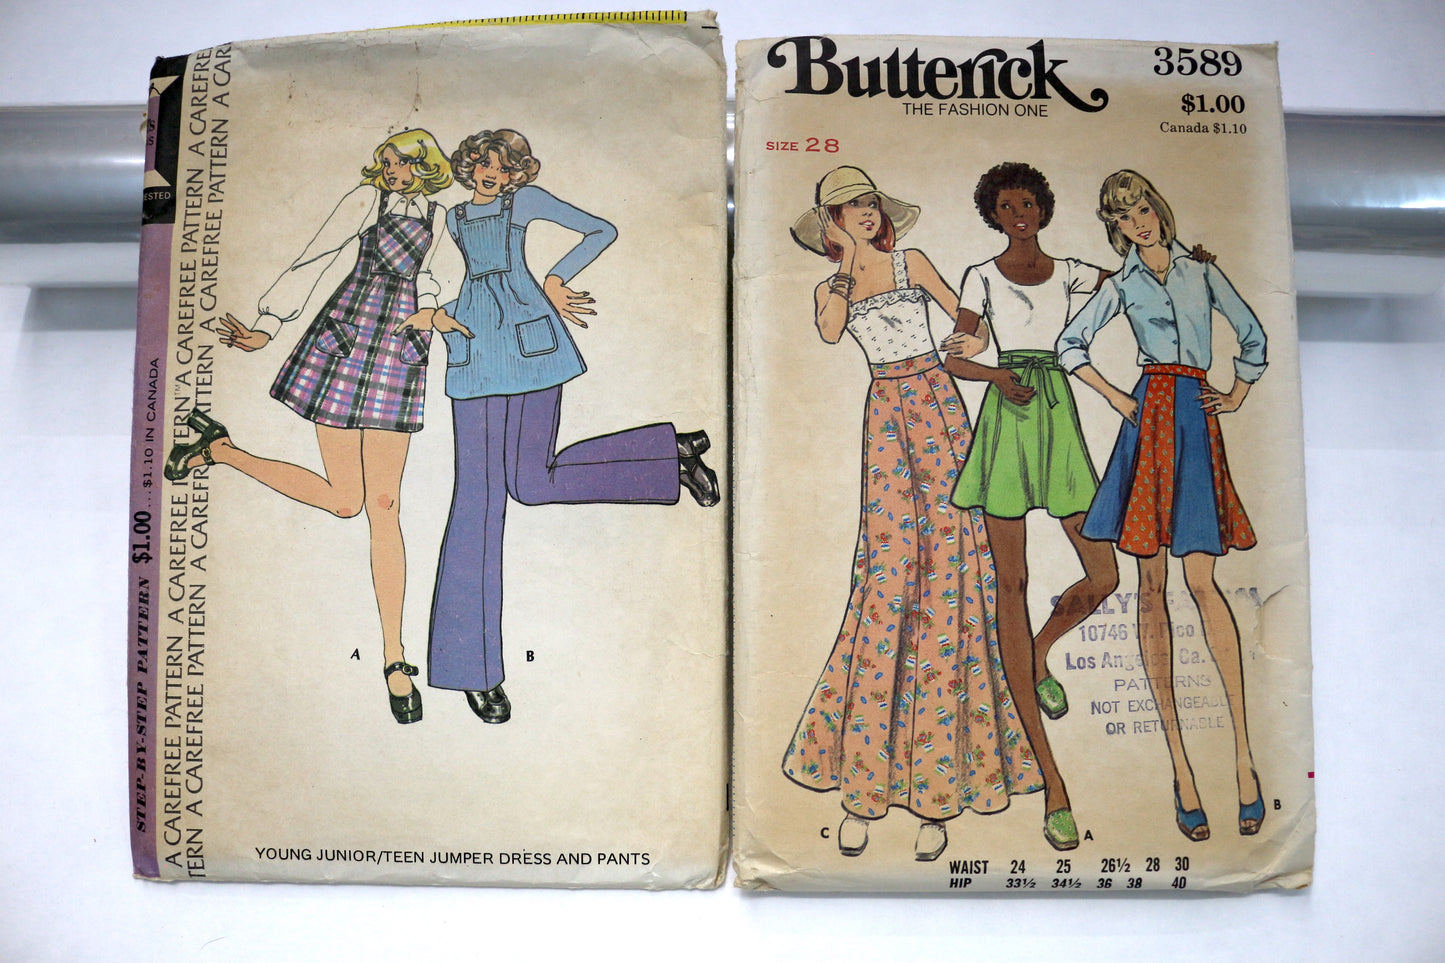 Butterick 3589 Skirt Sewing Pattern or McCalls 3698 Baby Doll Dress Sewing Pattern